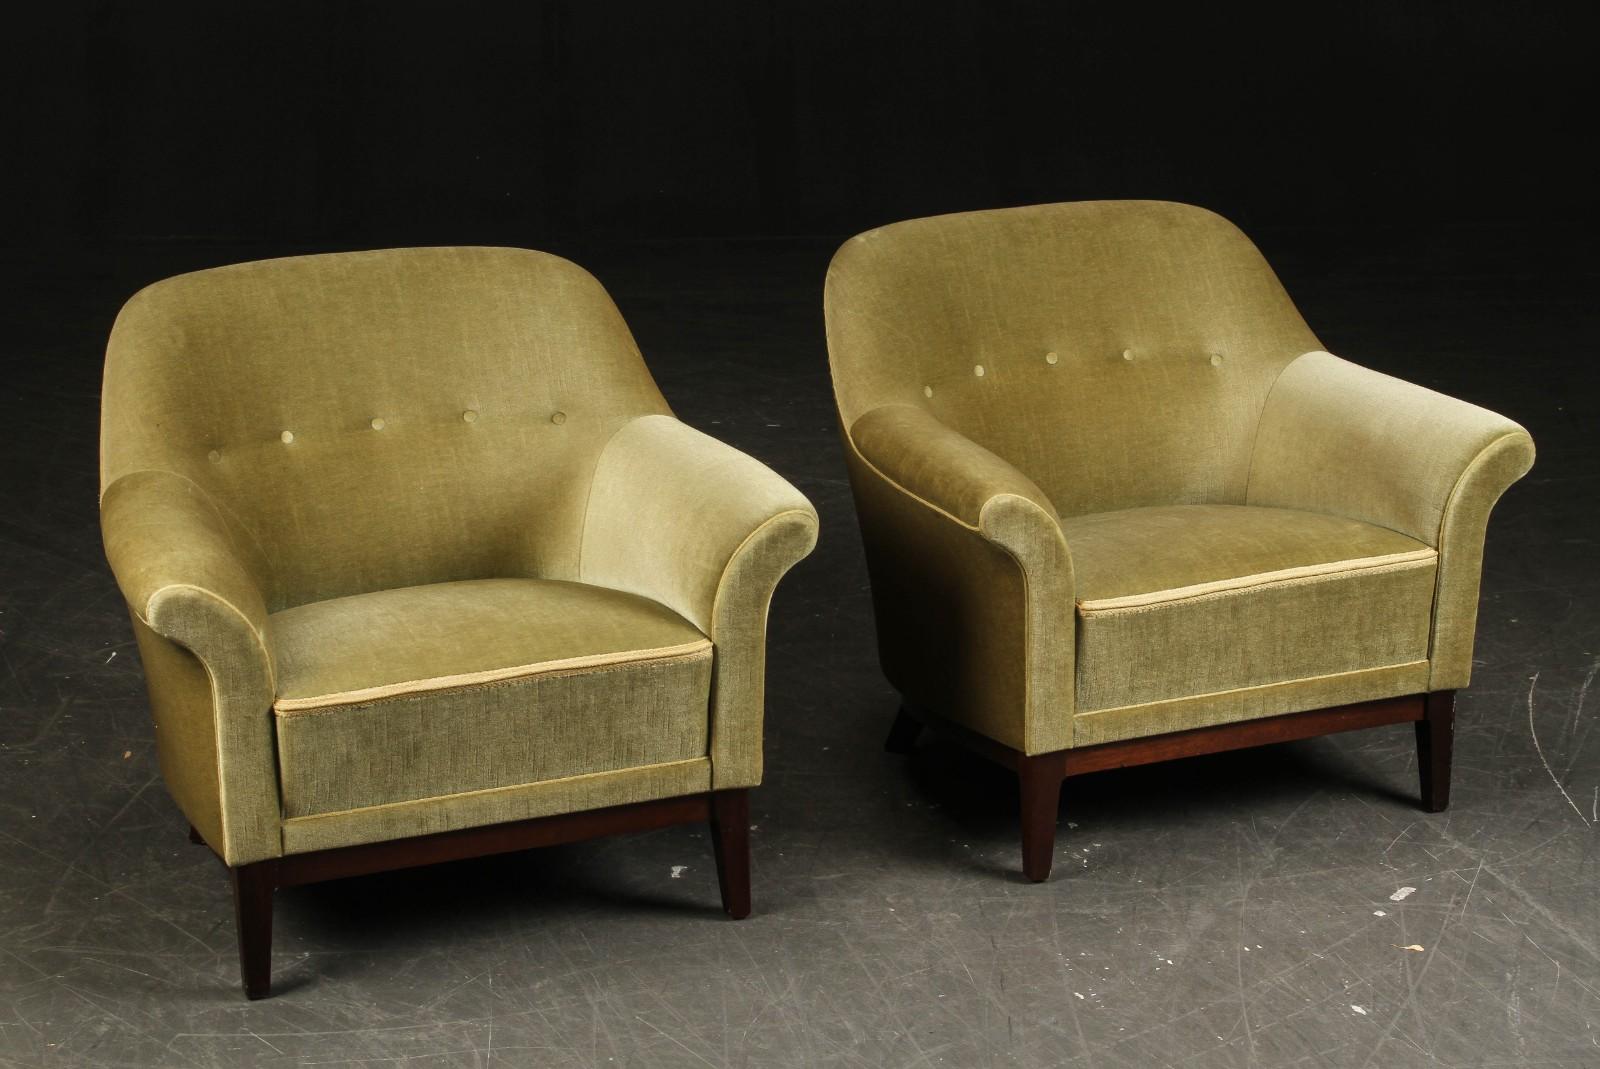 Pair of Danish Modern lounge chairs with mahogany legs upholstered in a green velour fabric. 
Well built and comfortable with elegant form.
  